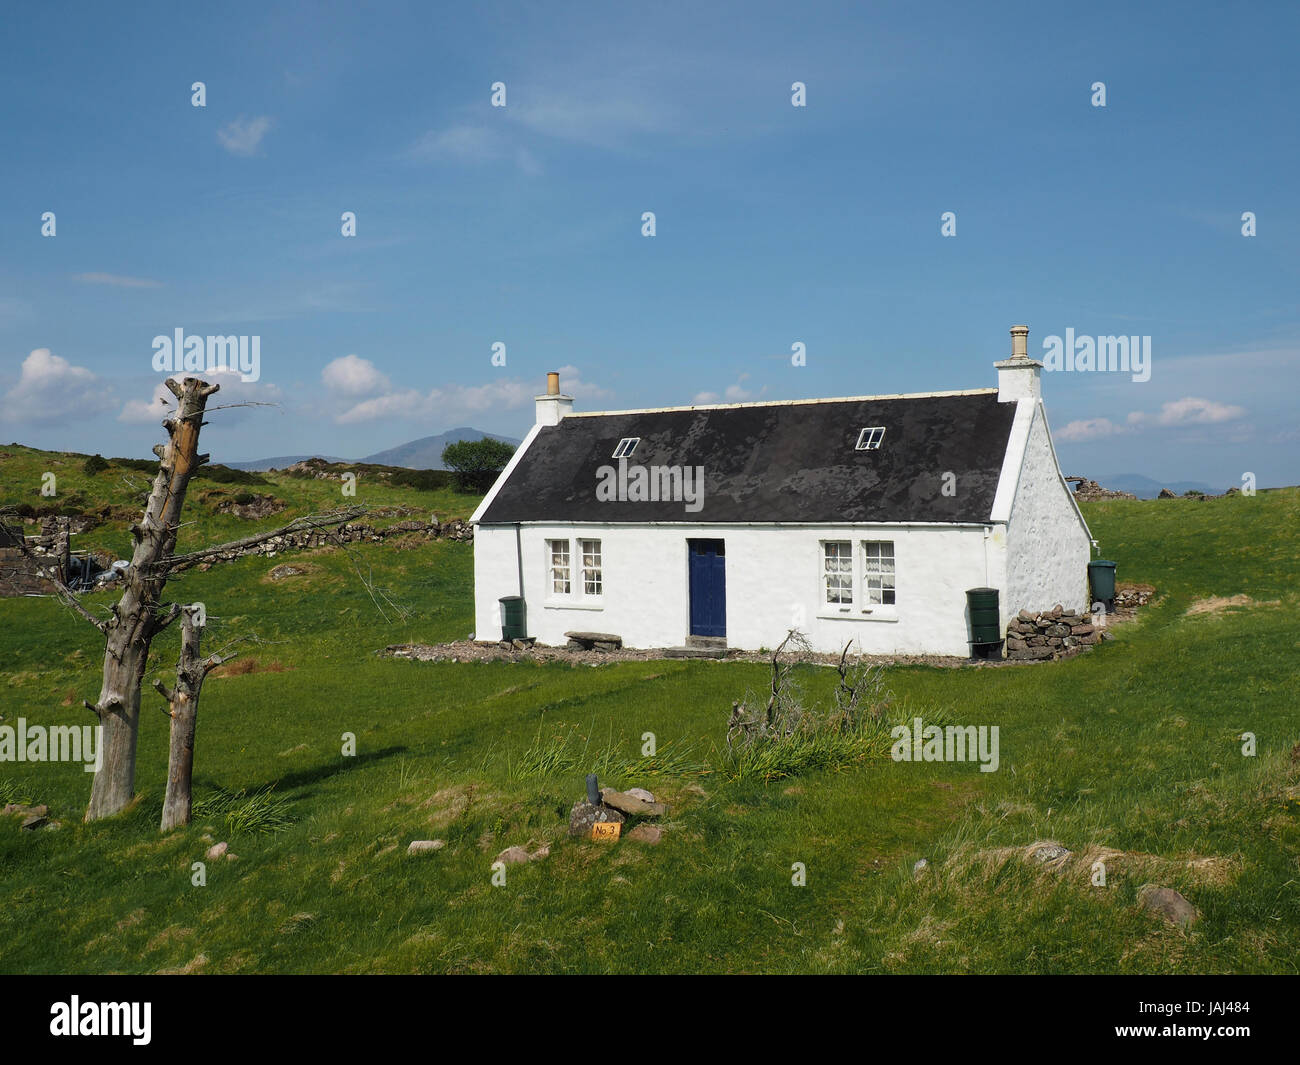 Number 3 house, Eilean fladday off Raasay, Scotland Stock Photo